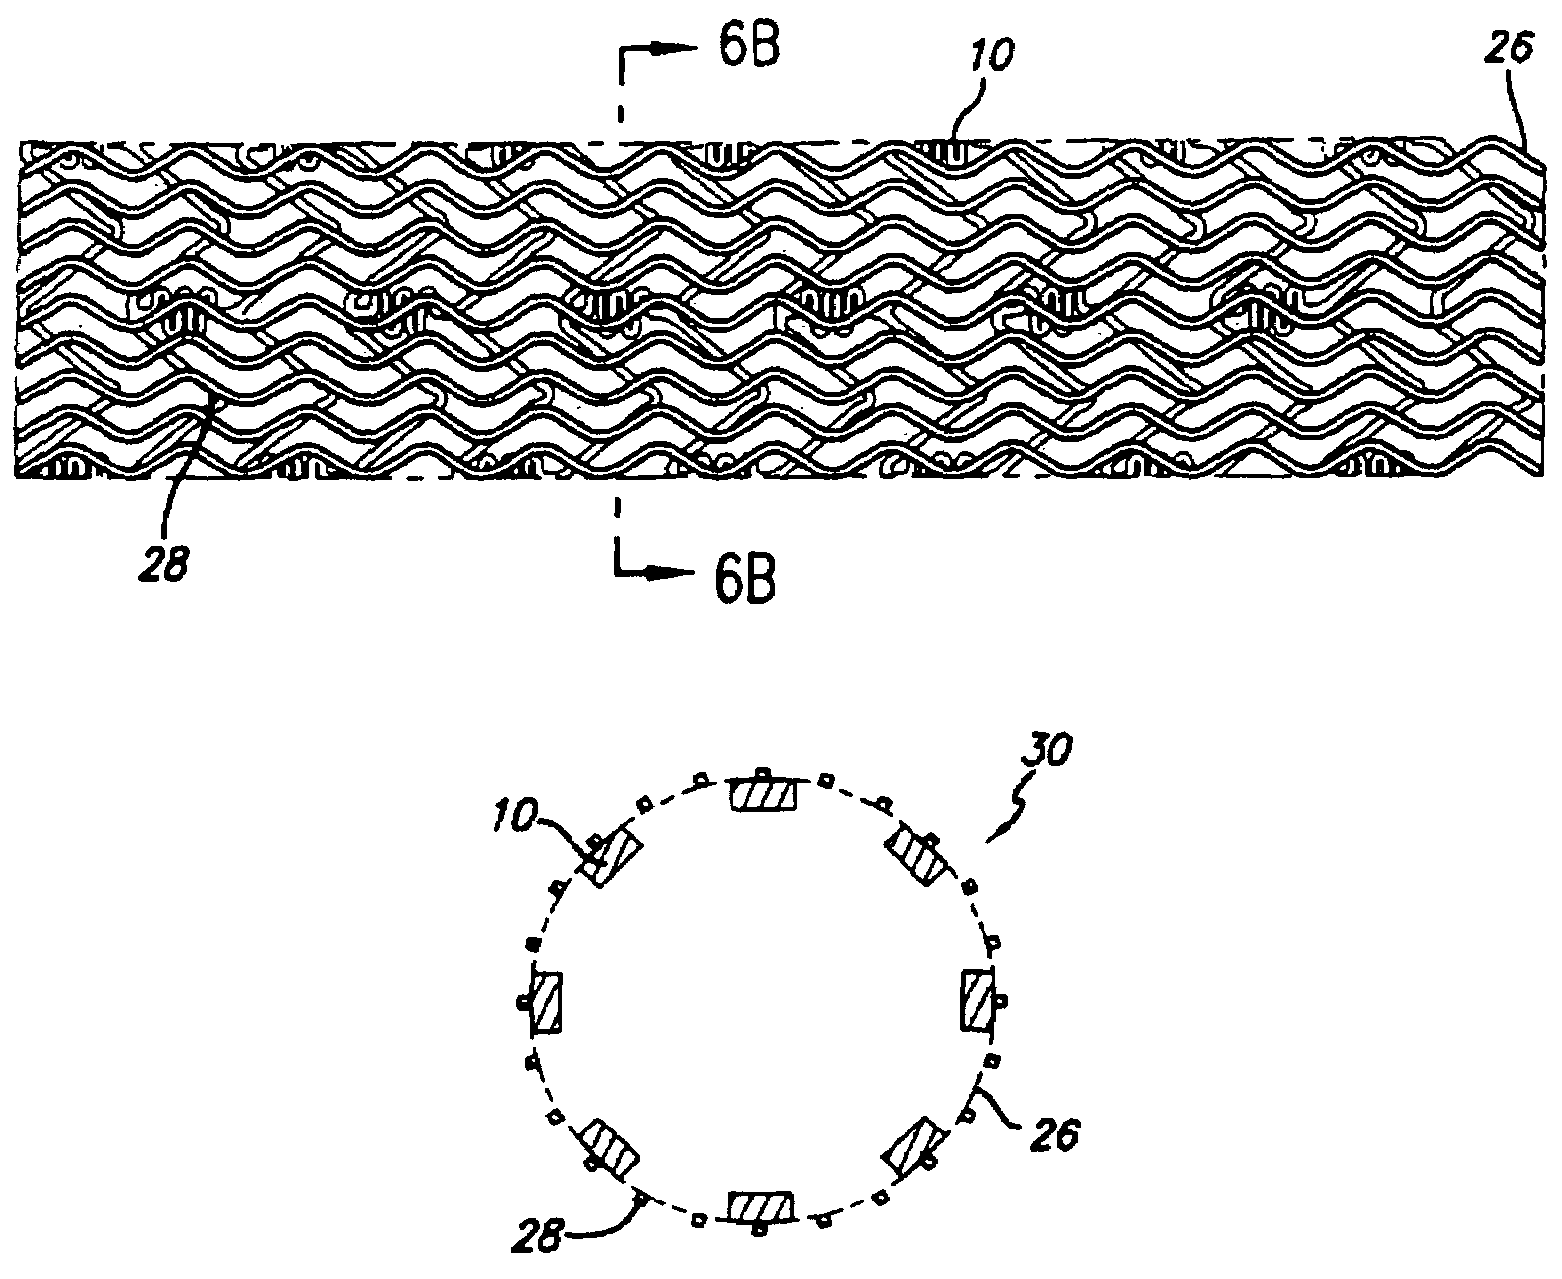 Drug-eluting stent and methods of making the same